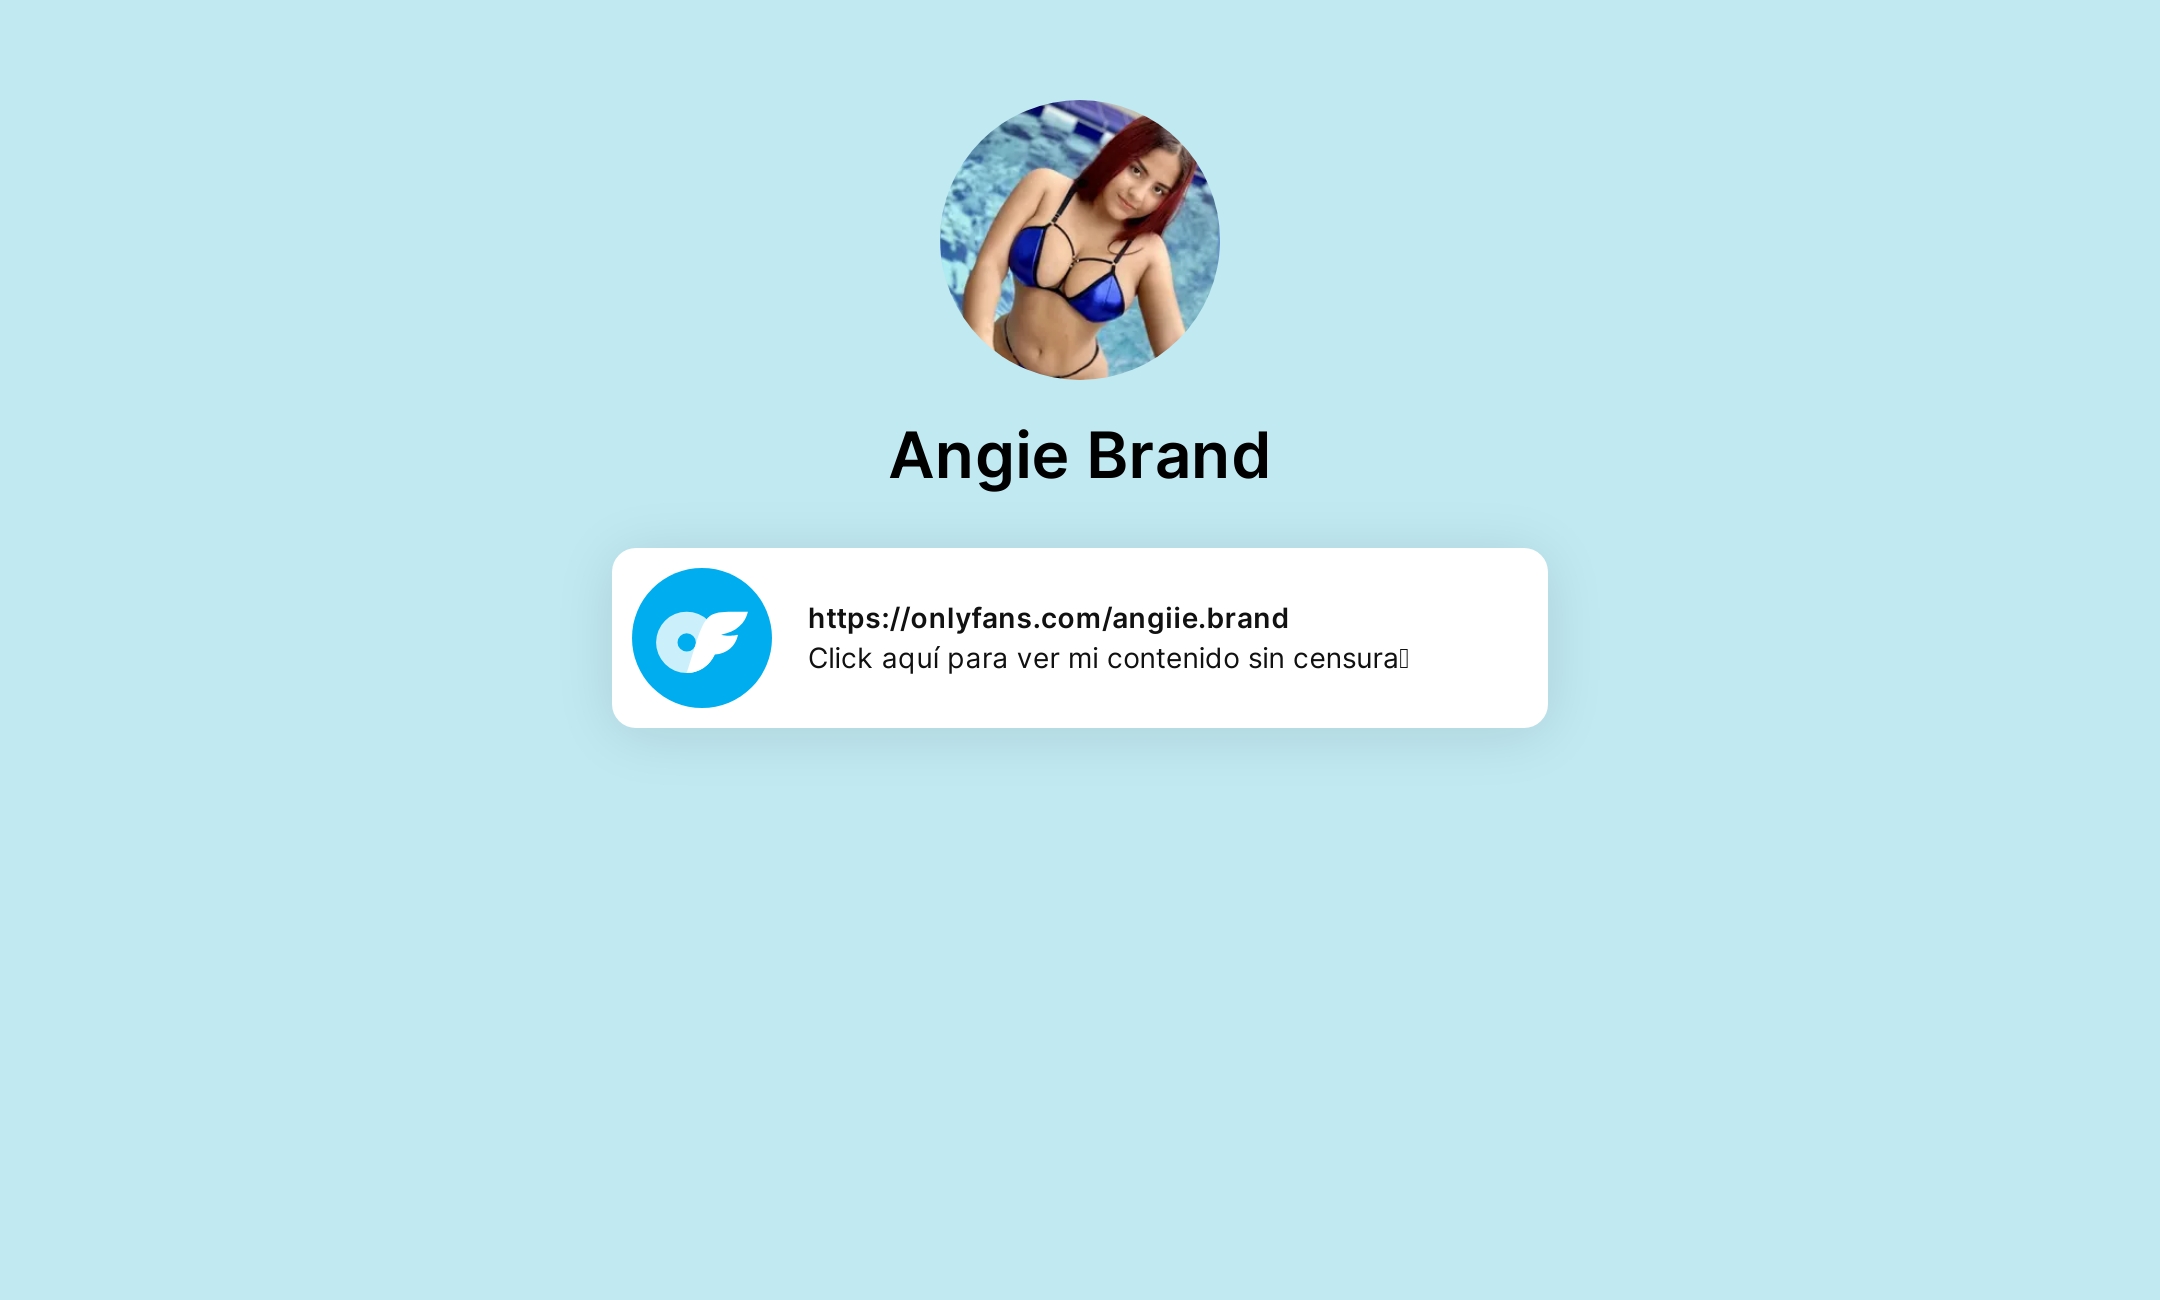 Brand onlyfans angie Angie brand